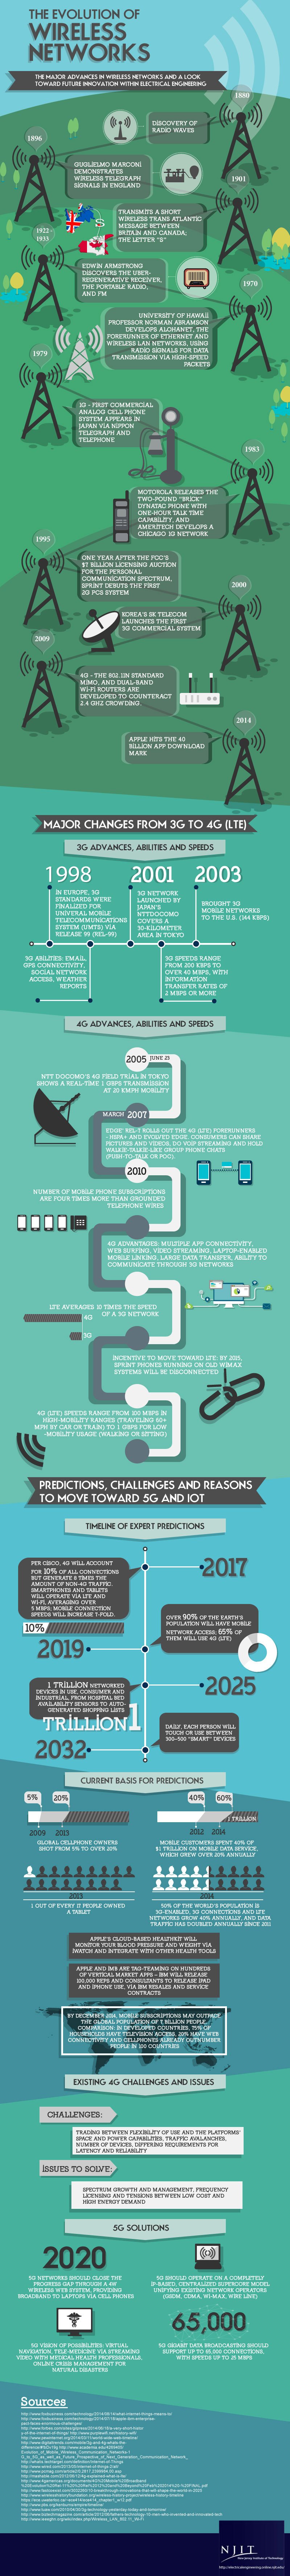 the-evolution-of-wireless-networks_final